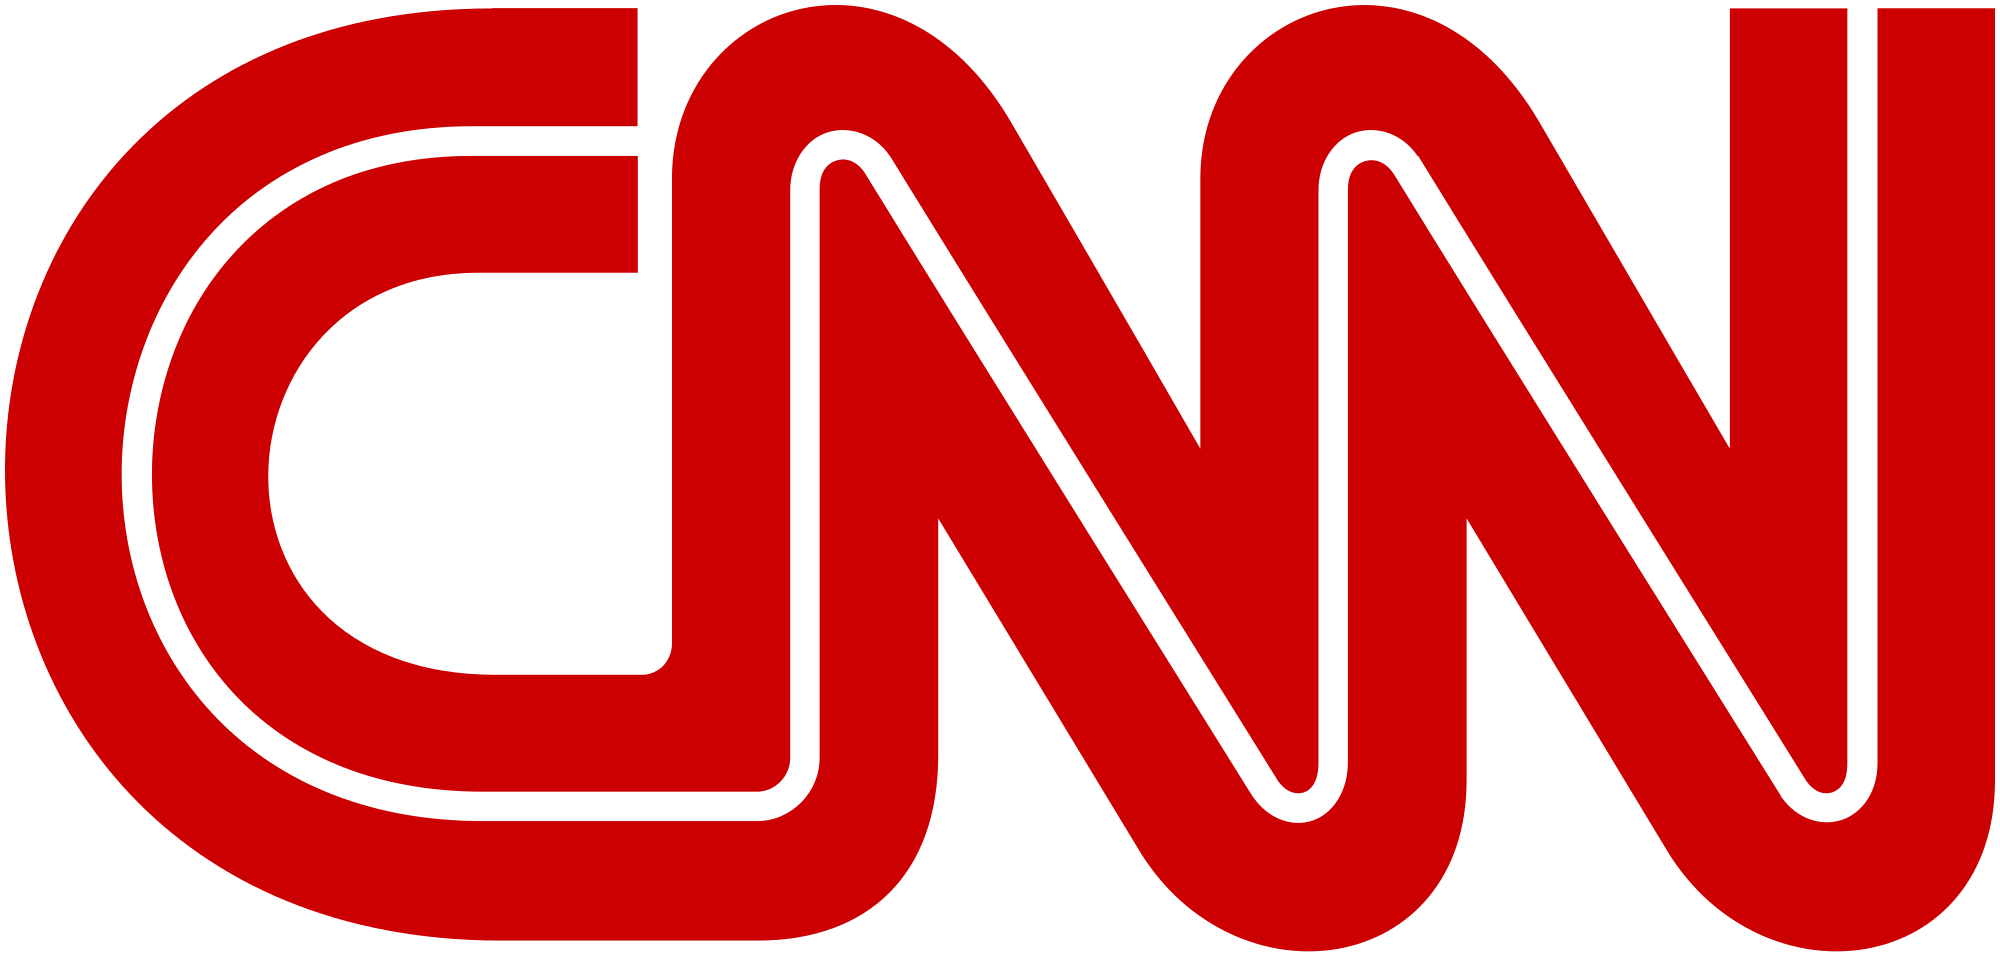 A red cnn logo is shown on a green background.